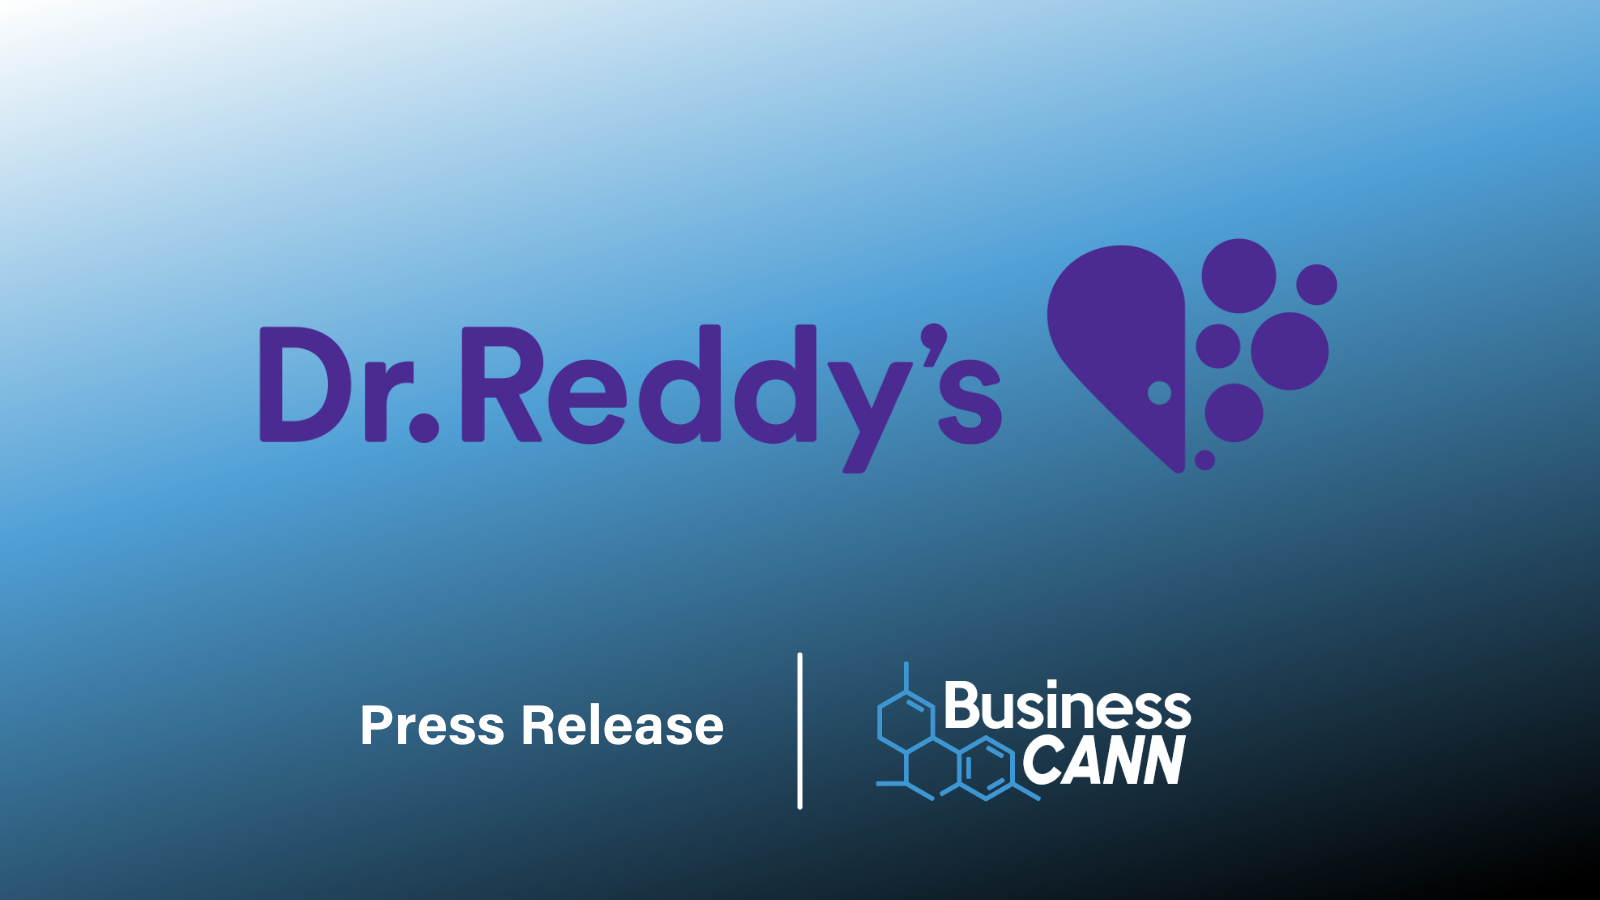 DR REDDY's Laboratories Ltd. and MediCane Health Inc. today announced the launch of its medical cannabis product in Germany.